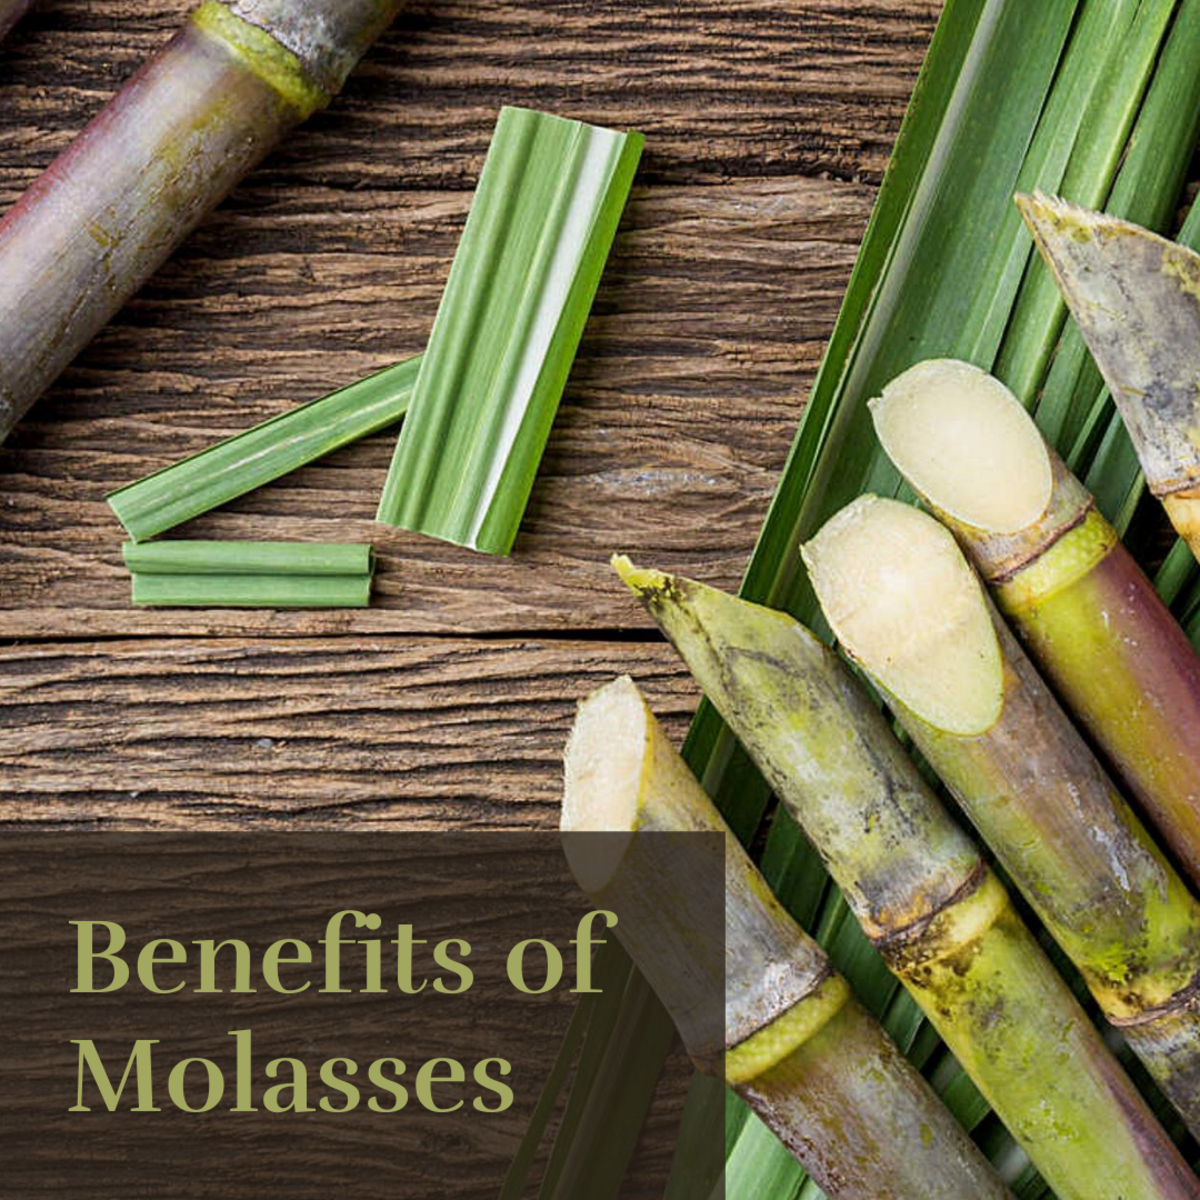 Molasses is surprisingly quite good for you!